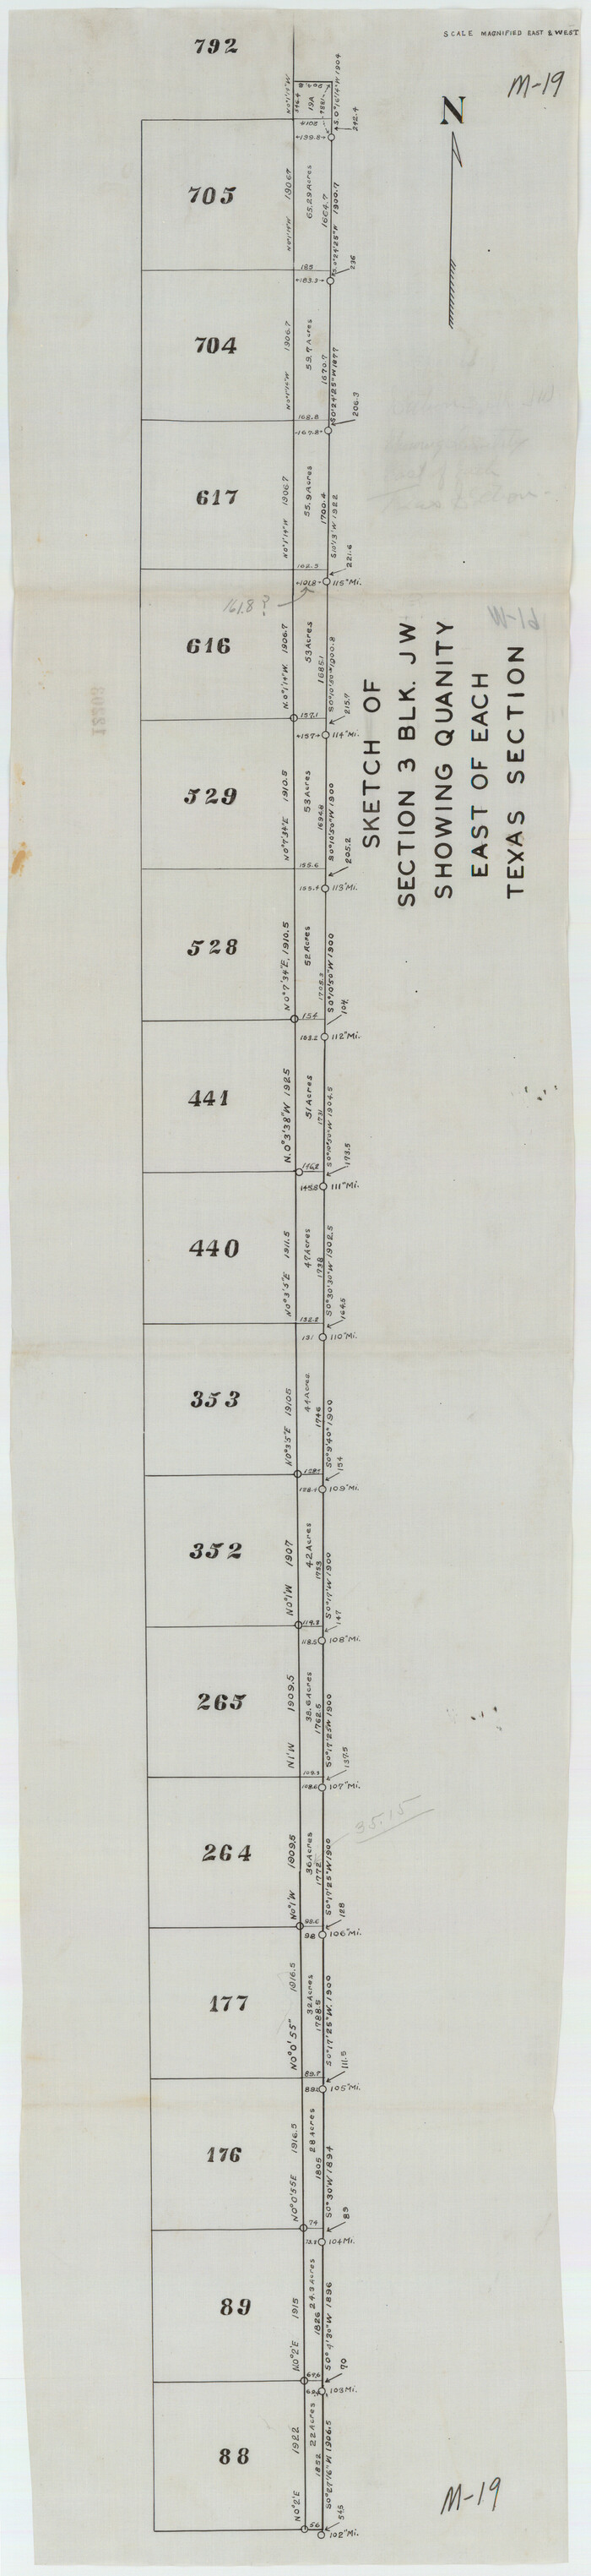 91985, Sketch of Section 3, Blk. JW, Showing Quantity East of Each Texas Section, Twichell Survey Records